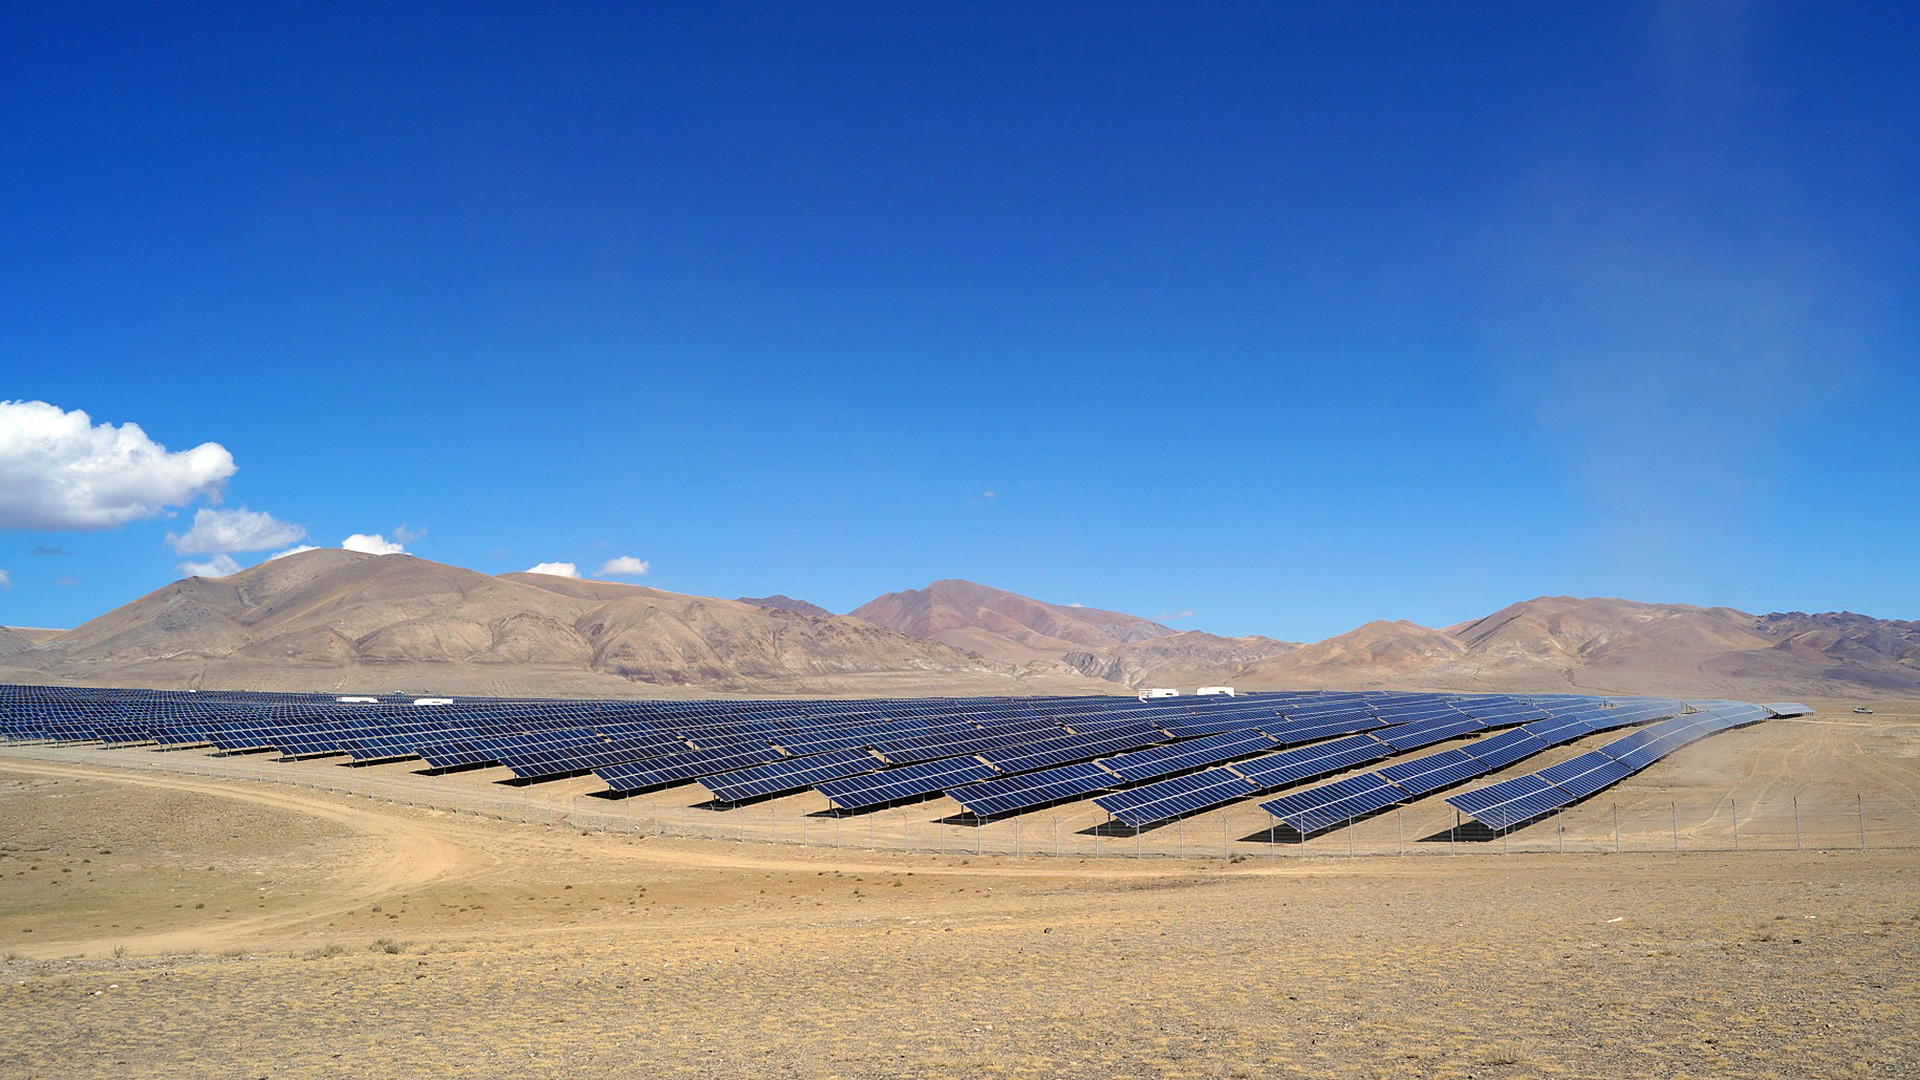 Kosh-Agachskaya solar power plant in the Republic of Altai was opened in 2014.